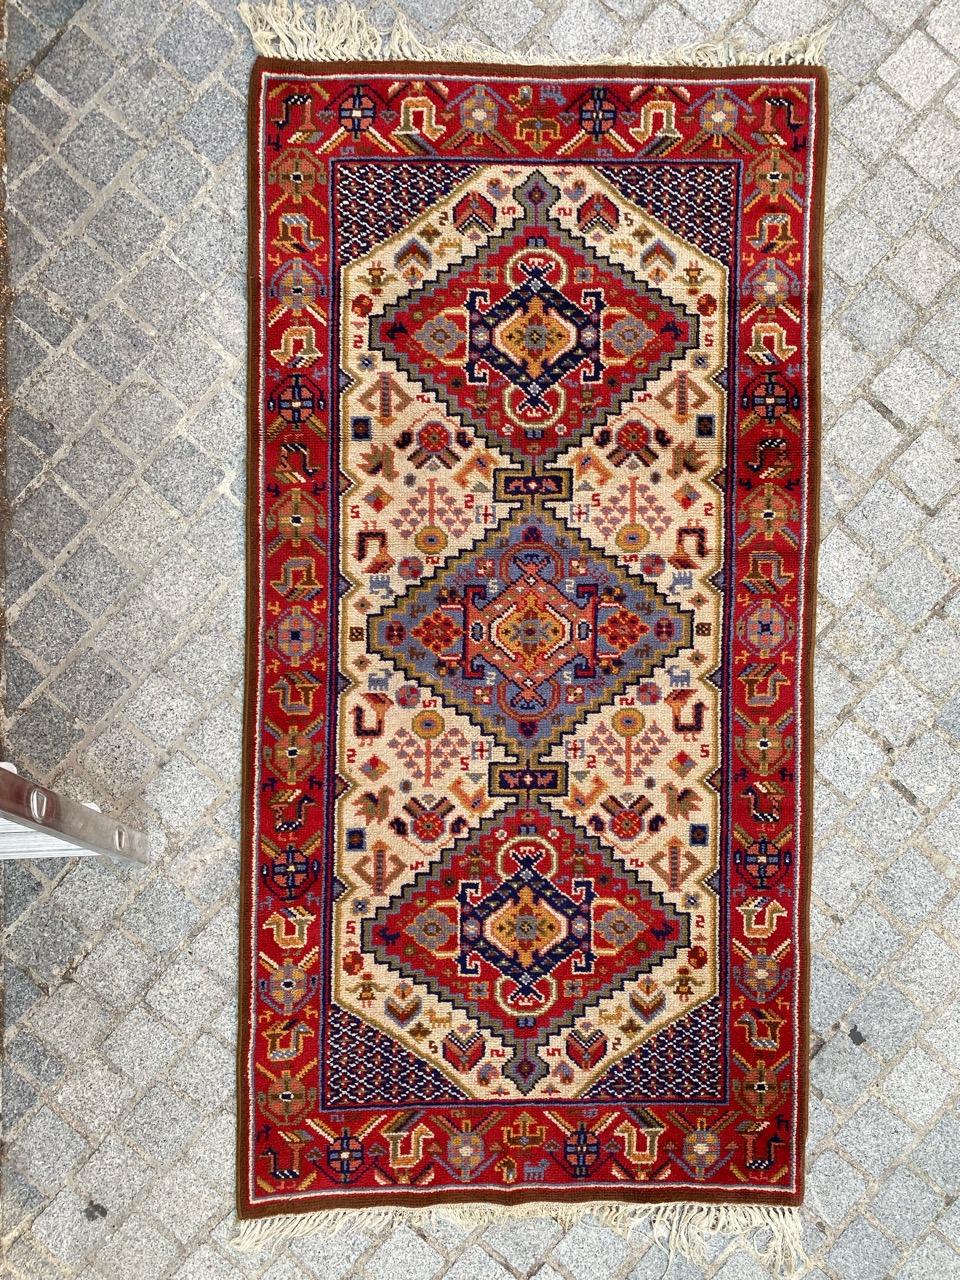 Beautiful French Rug from the mid-20th century. This rug is a masterpiece, meticulously knotted with wool on a cotton and jute foundation. It features a stunning Persian design inspired by Shiraz, showcasing intricate red-dark blue and light